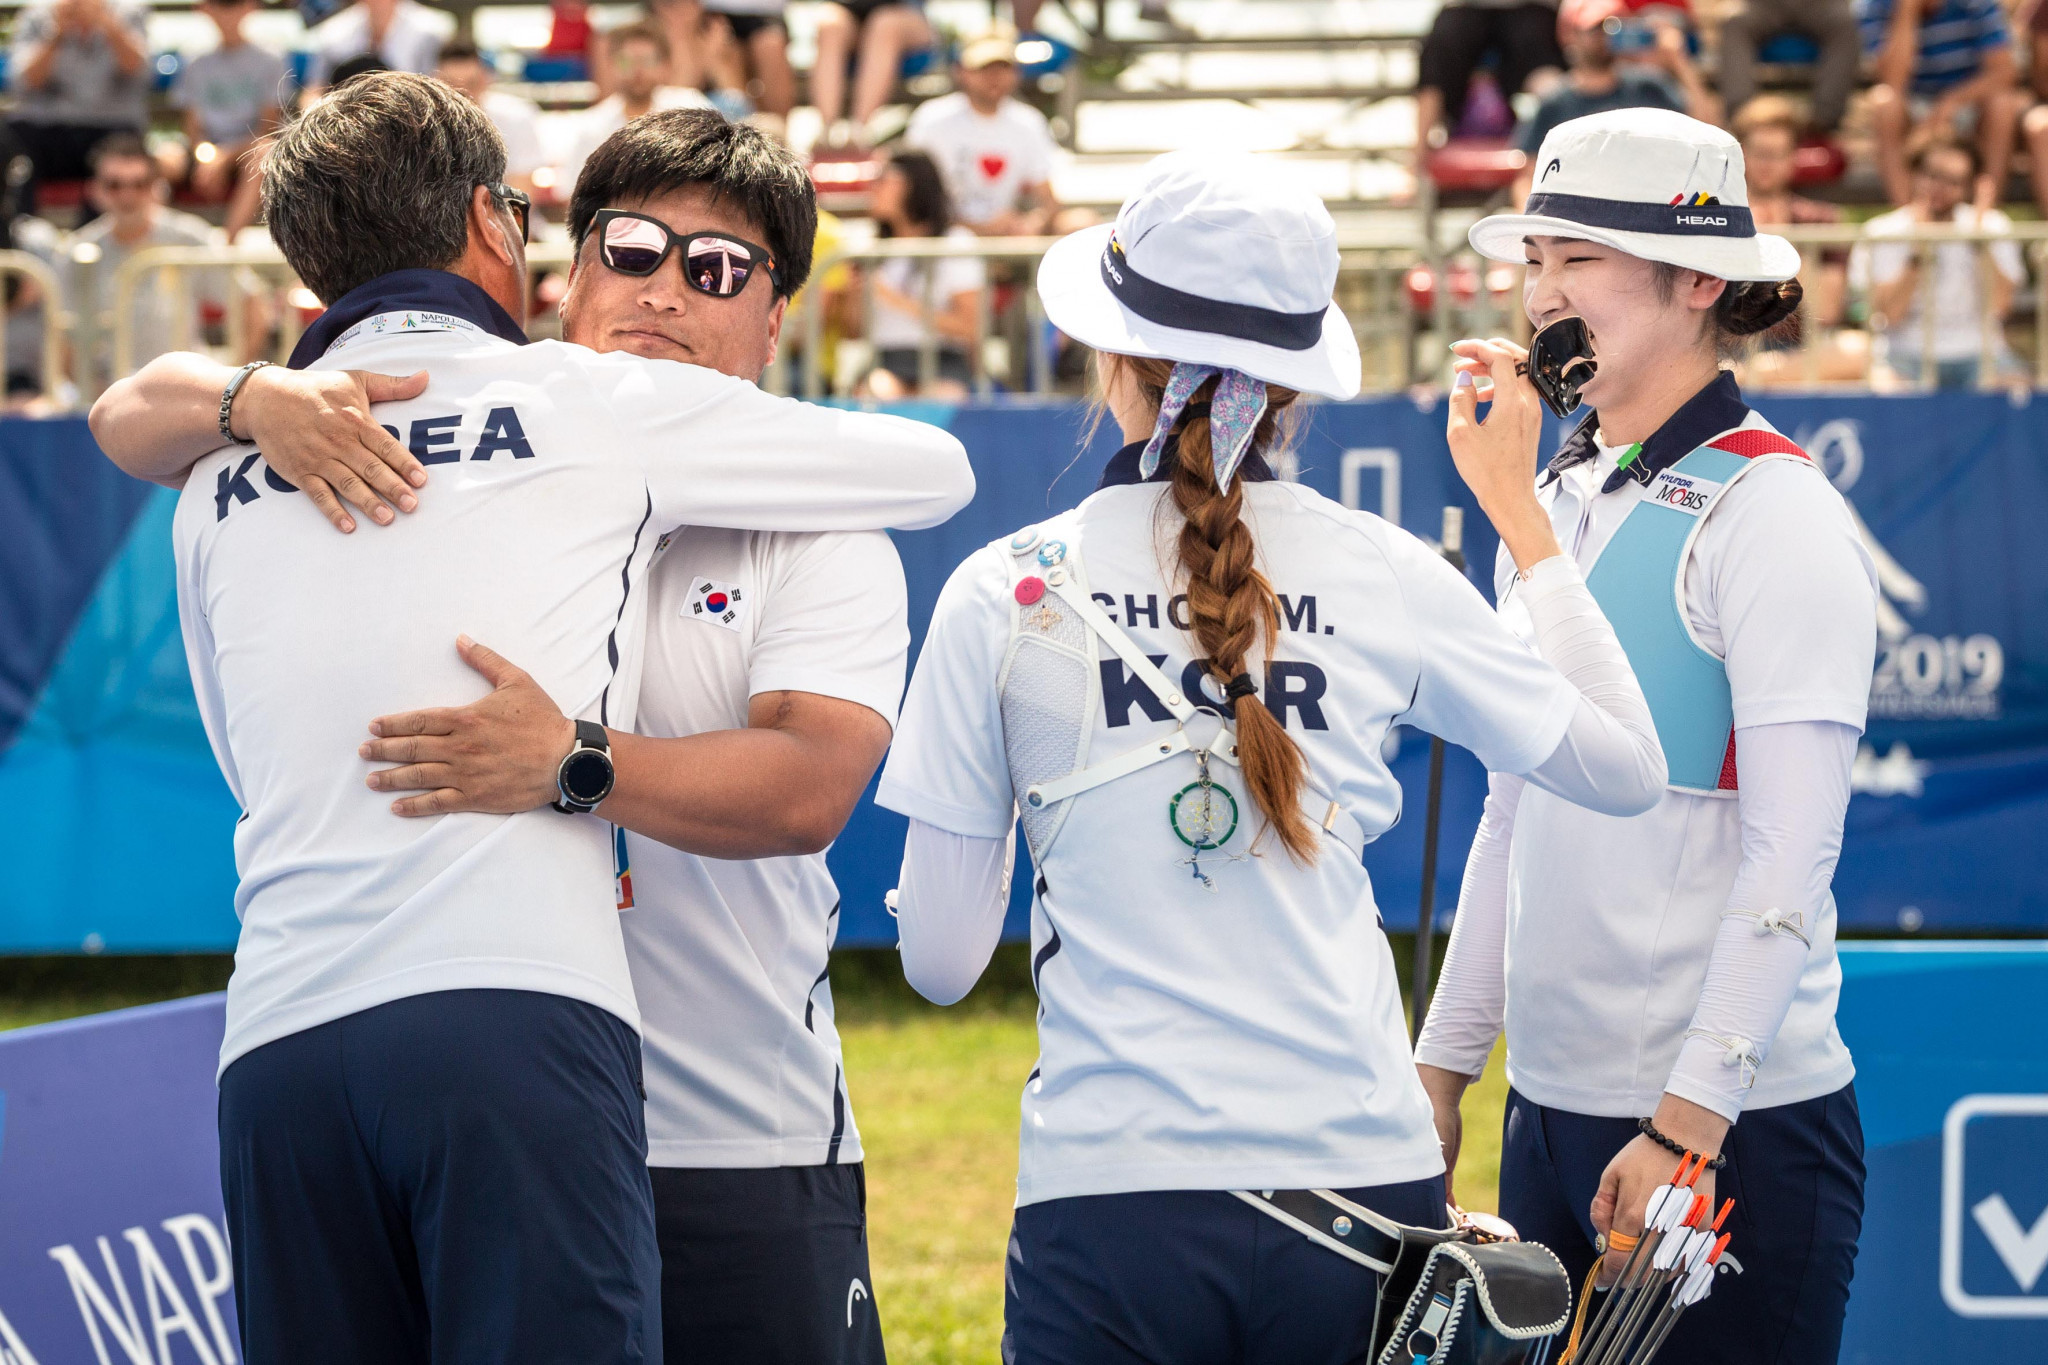 South Korea won three of the five recurve archery gold medals on offer at the Royal Palace in Caserta ©Naples 2019